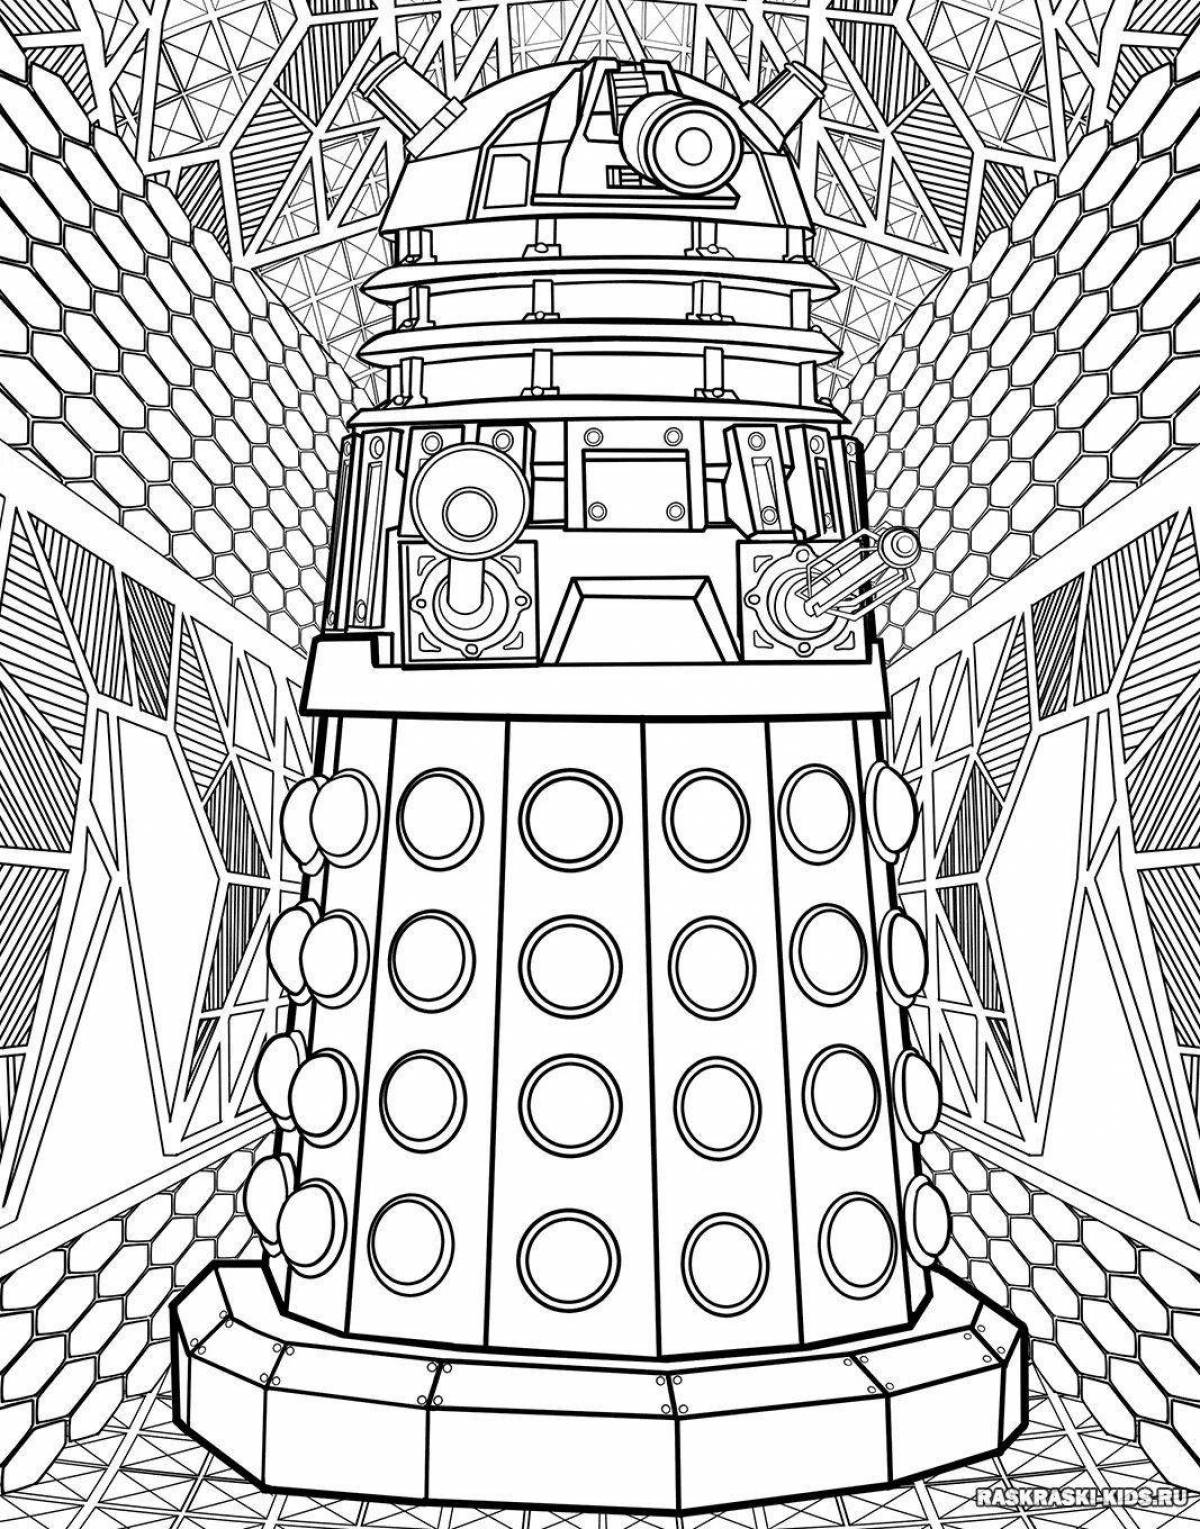 Gorgeous doctor who coloring page